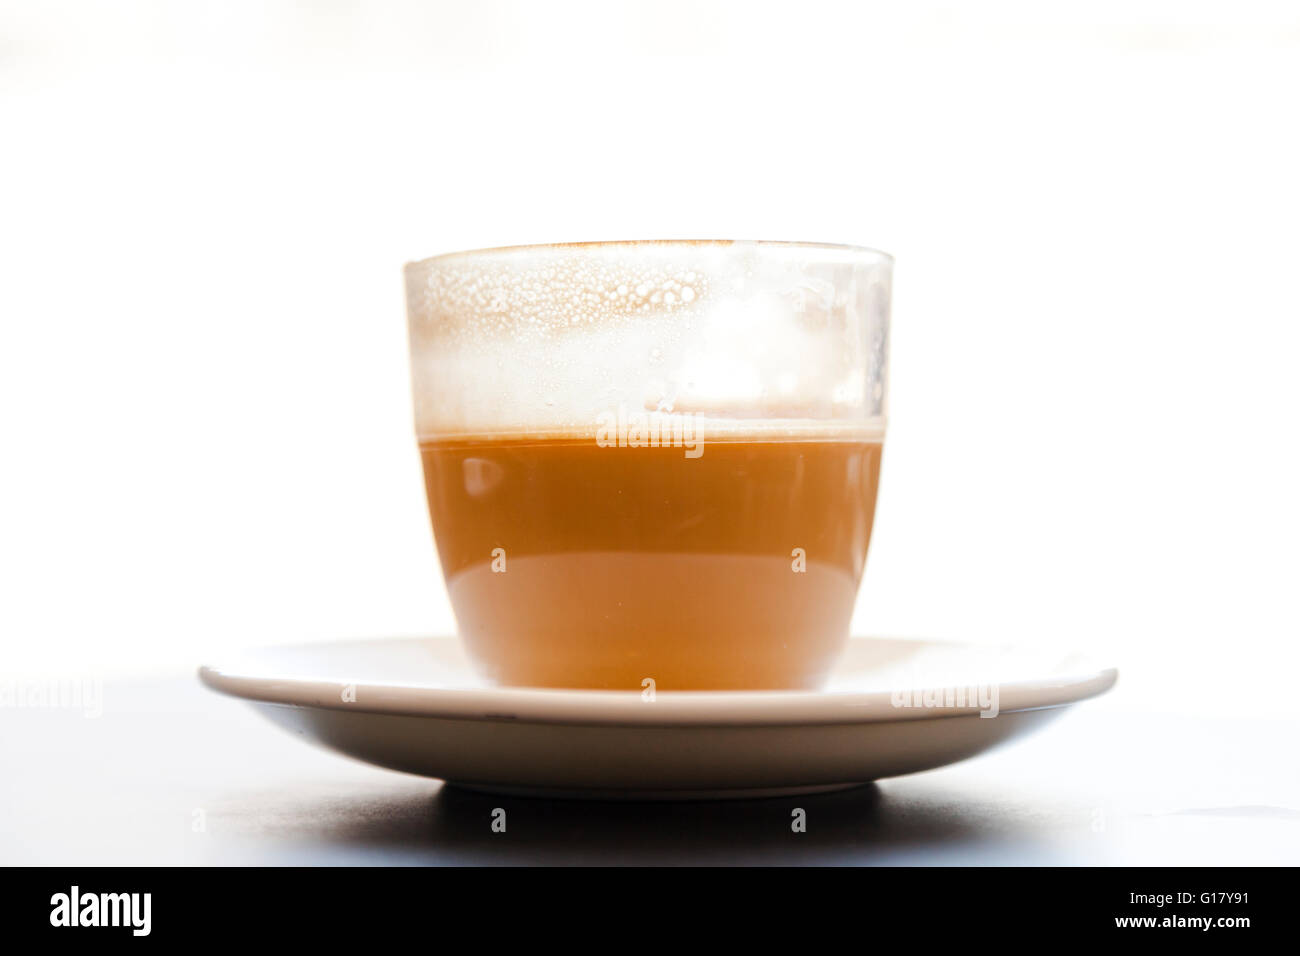 A glass half full of coffee,  cortado style viewed from the side against a whiet background Stock Photo